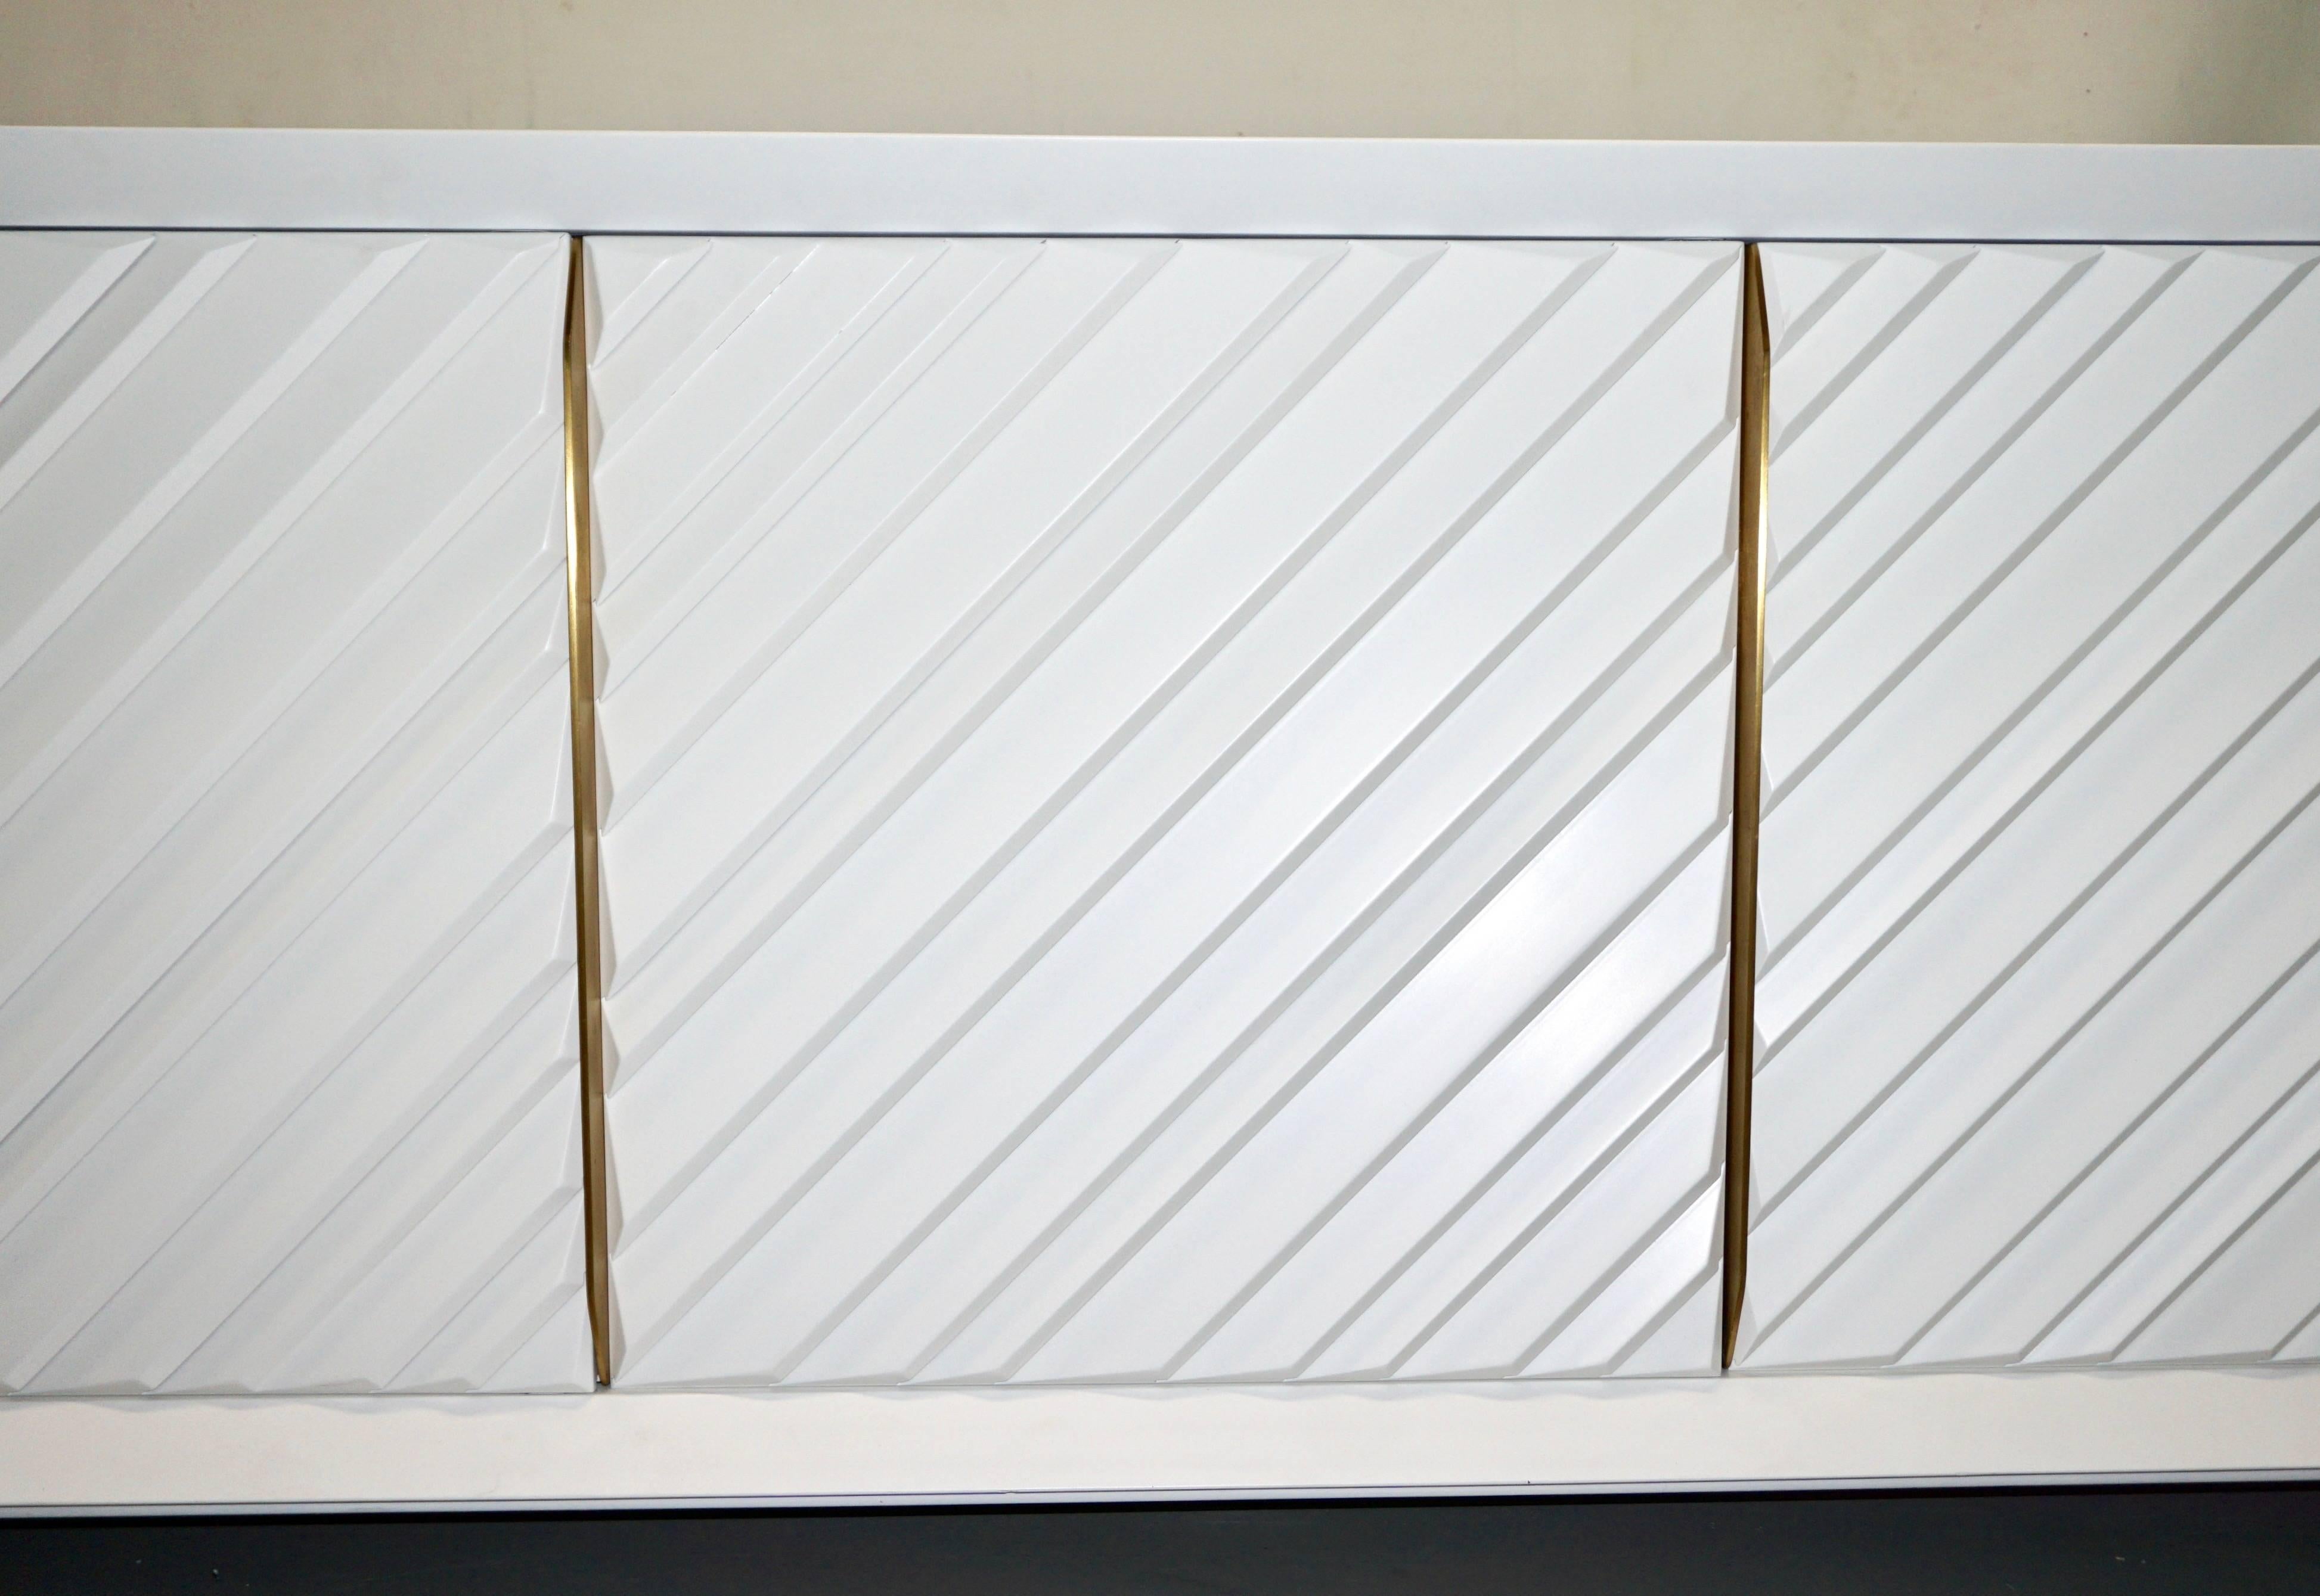 Brass Frigerio 1970s Italian White Lacquered Carved Wood Credenza or Dresser